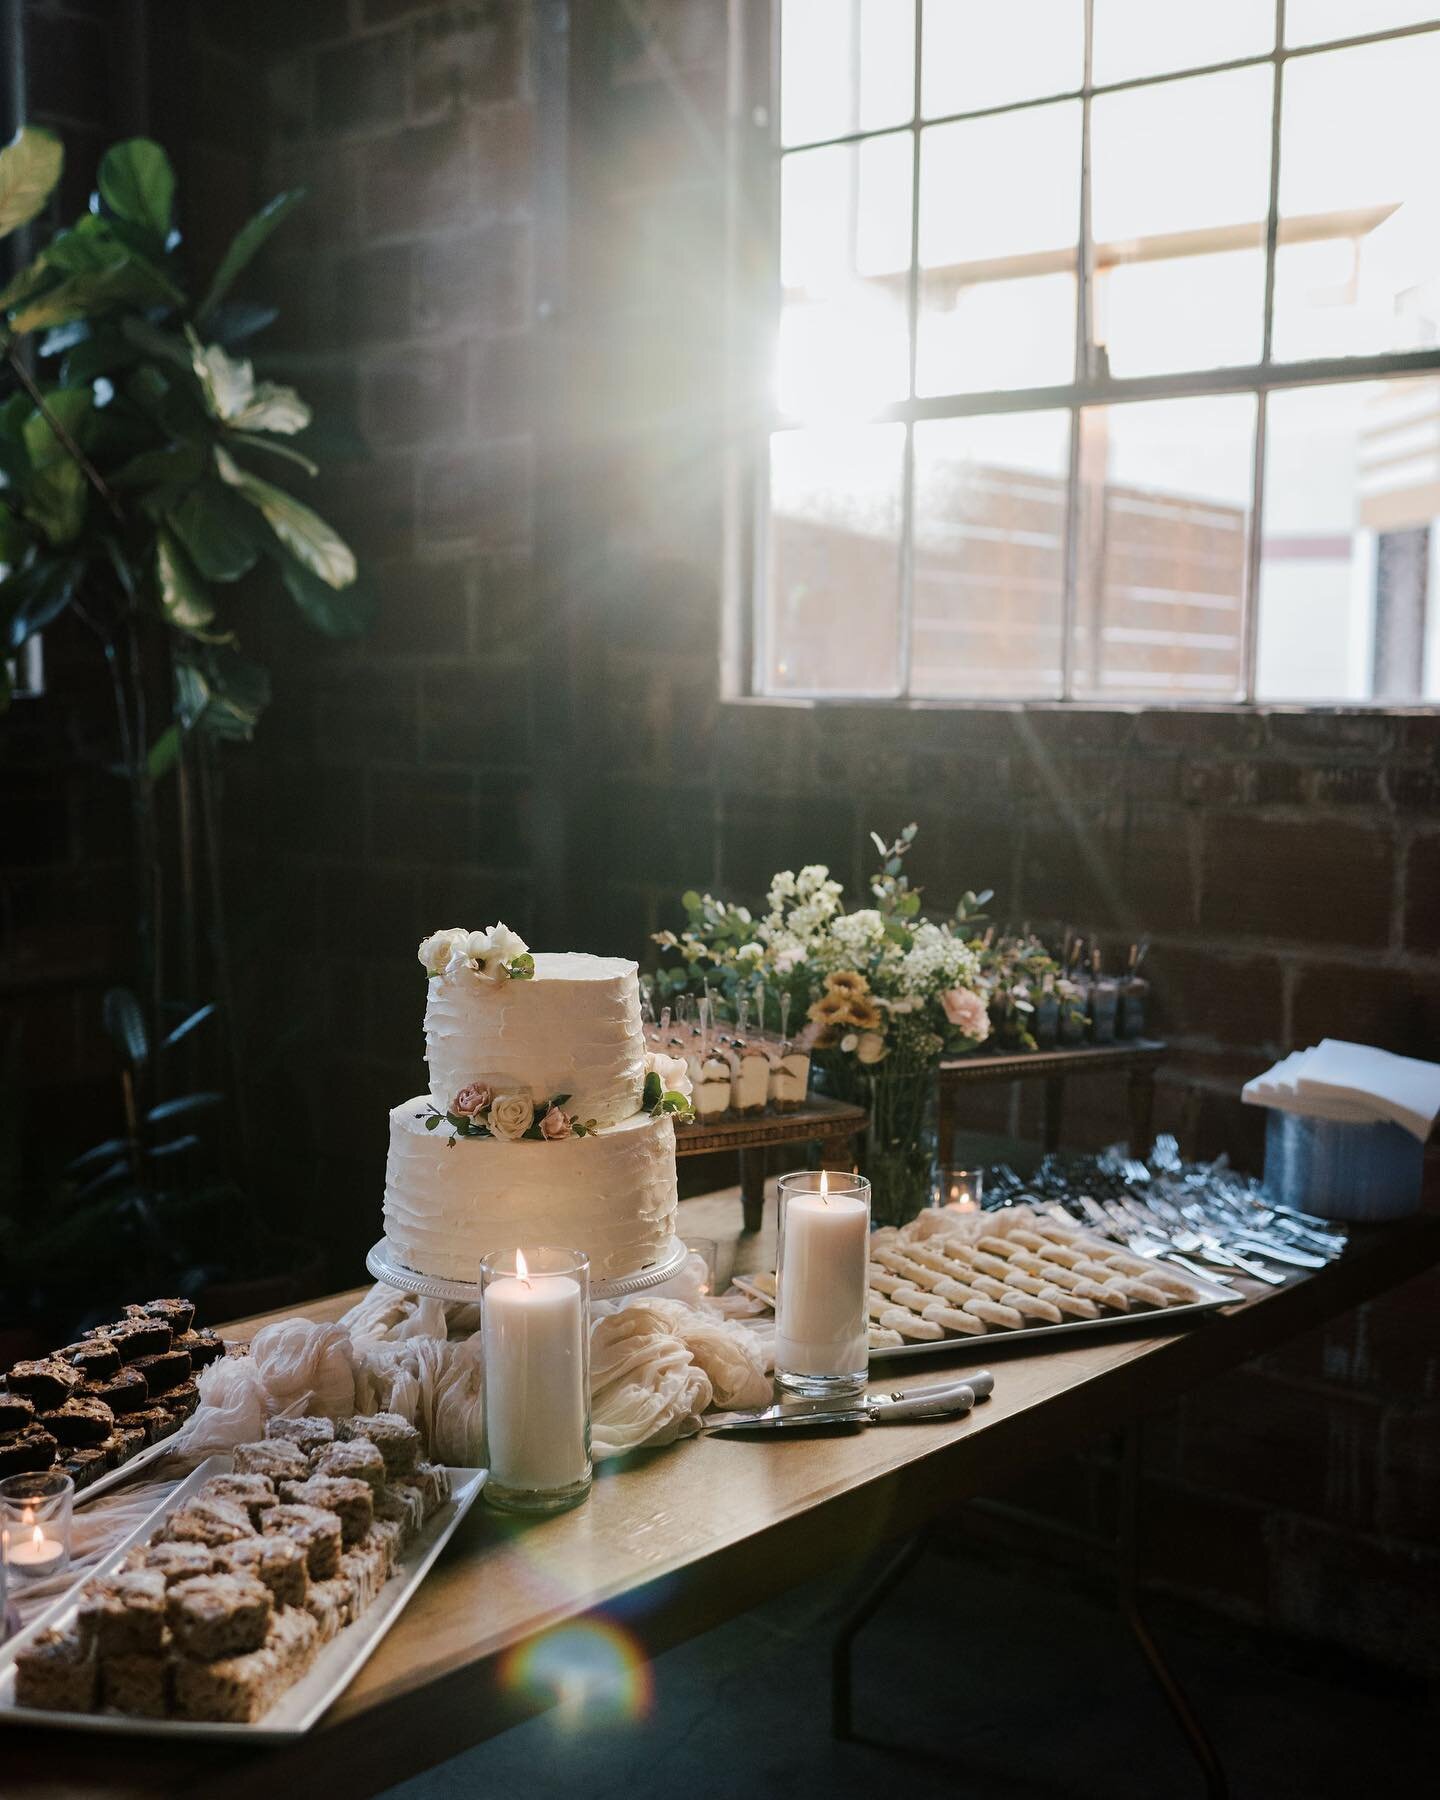 Dreamy dessert table vibes captured by the best @anyaismyname